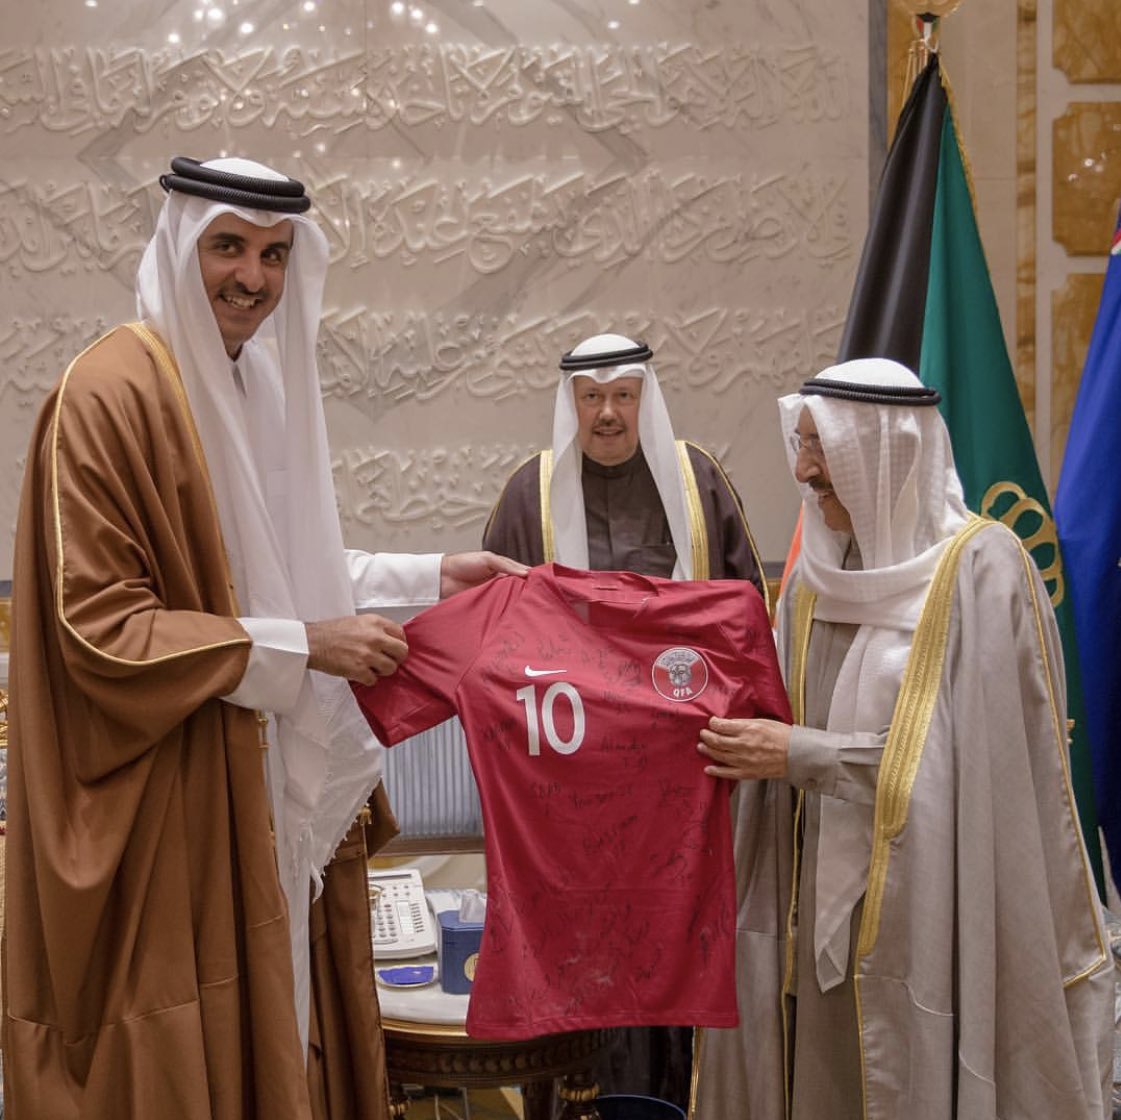 In the image .. Amir of Qatar presents his Kuwaiti counterpart shirt "champion of Asia" Tuesday 5 Fe 636849473063213870-DykabbpX0AEYgP6